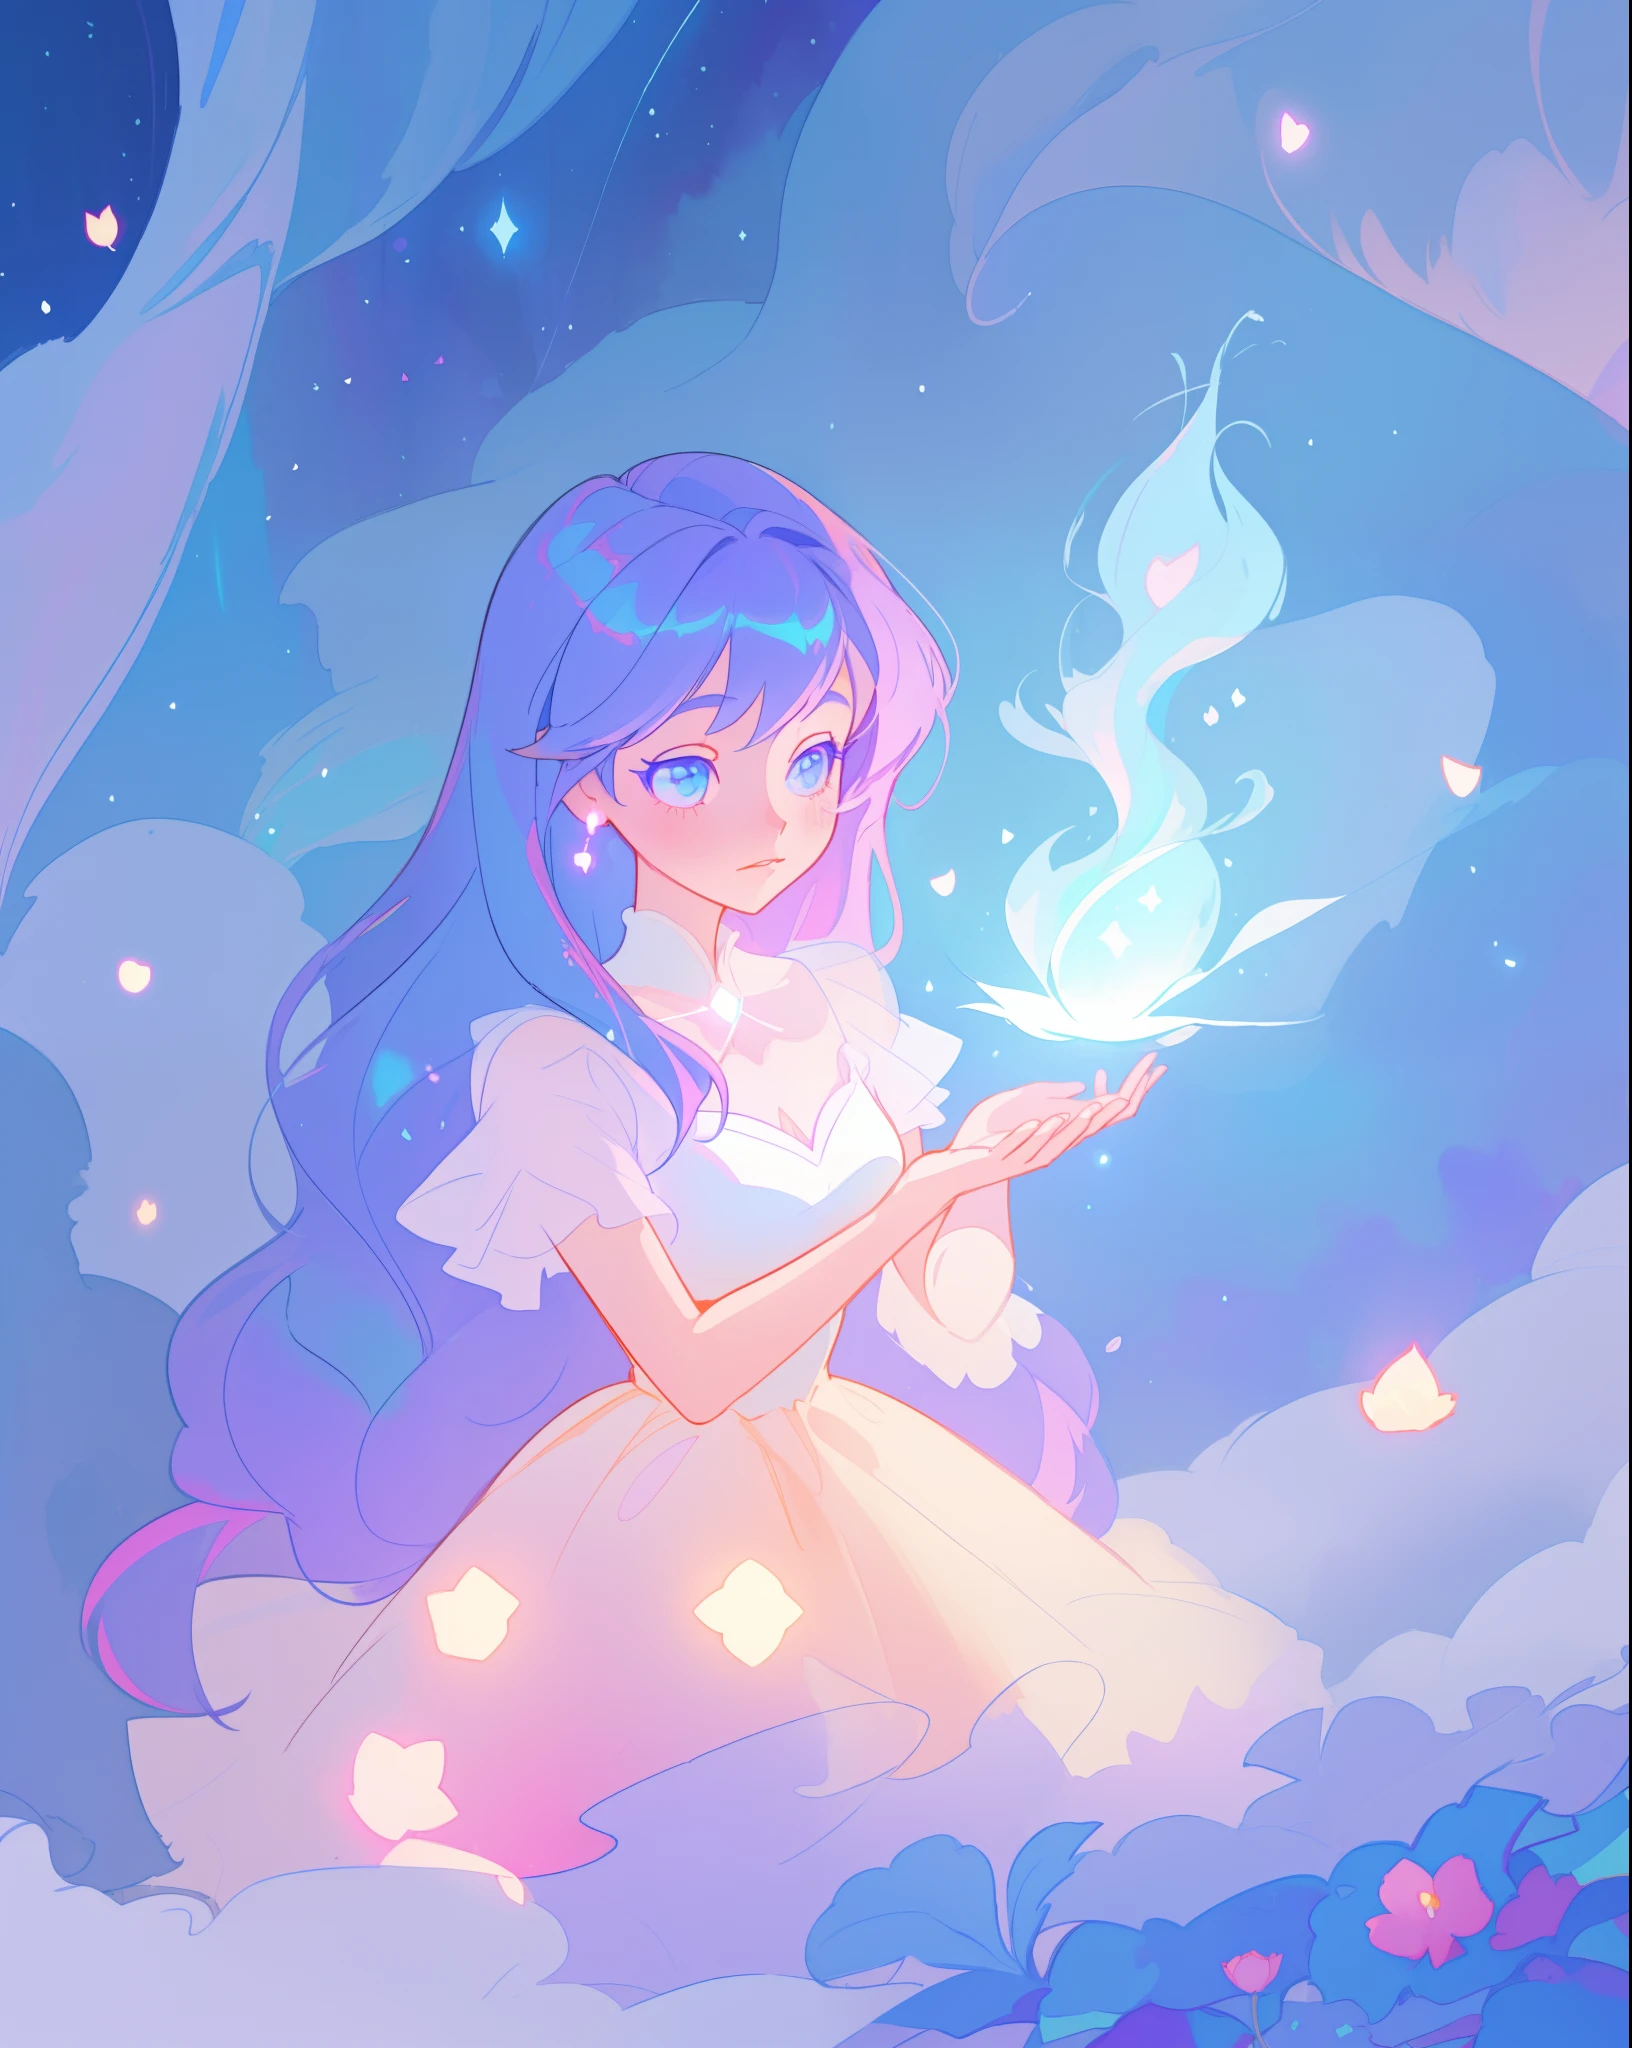 beautiful girl in puffy white ballgown, long dark hair, magical glowing blue lights coming from her hands, magical, whimsical, blue pink and purple colors, watercolor illustration, inspired by Glen Keane, inspired by Lois van Baarle, disney art style, by Lois van Baarle, glowing aura around her, by Glen Keane, jen bartel, glowing lights! digital painting, flowing glowing hair, glowing flowing hair, beautiful digital illustration, fantasia otherworldly landscape plants flowers, beautiful, masterpiece, best quality, anime disney style